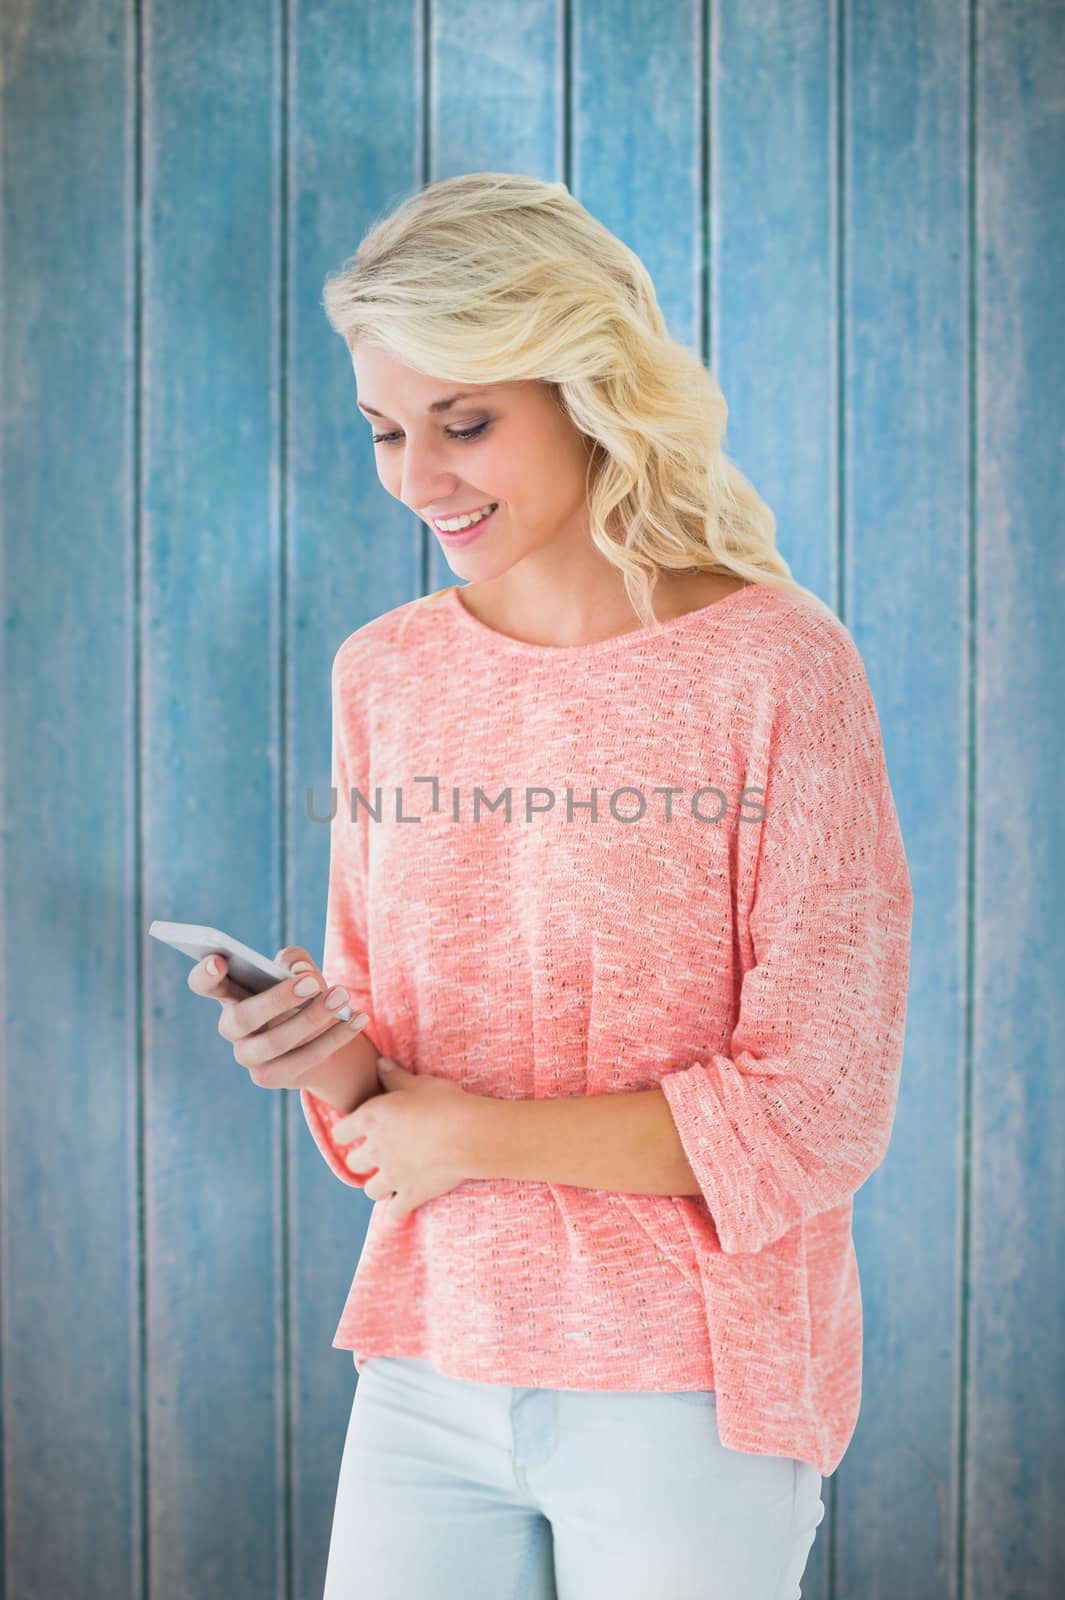 Pretty blonde using her smartphone against wooden planks